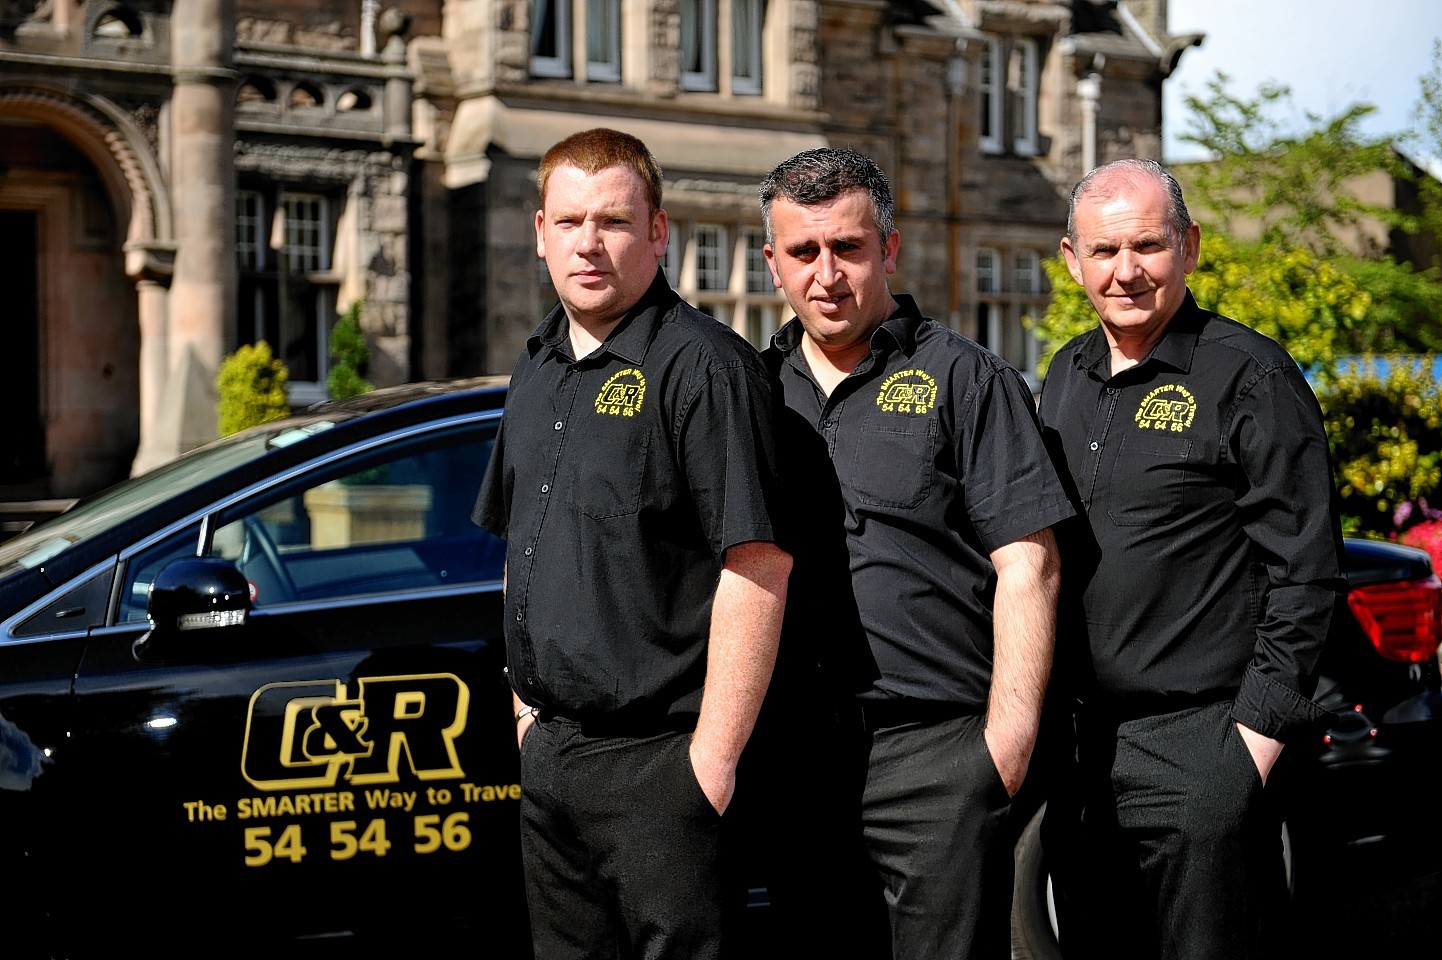 C&R taxi firm have already started wearing smart uniforms